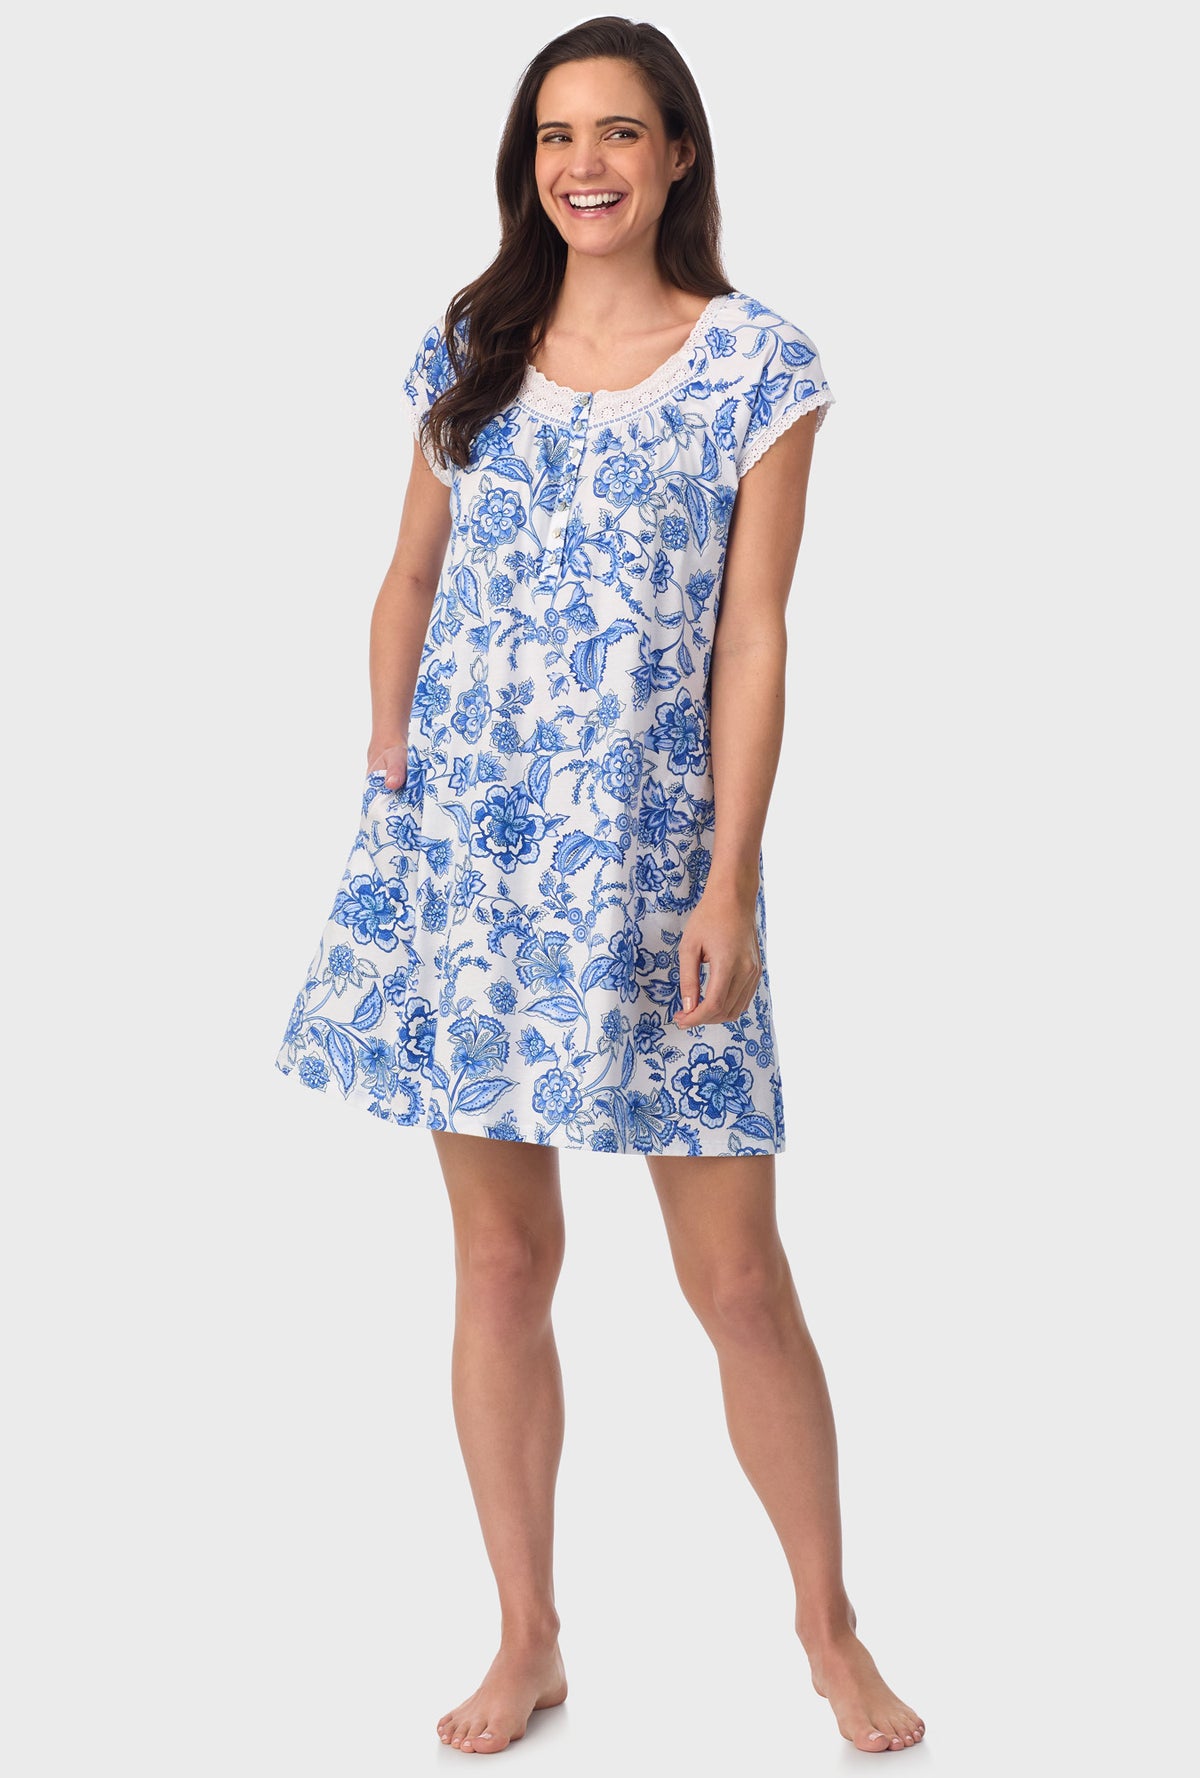 A lady wearing blue short Sleeve  Floral Vine Cap Sleeve Nightshirt with Colbalt Blue print